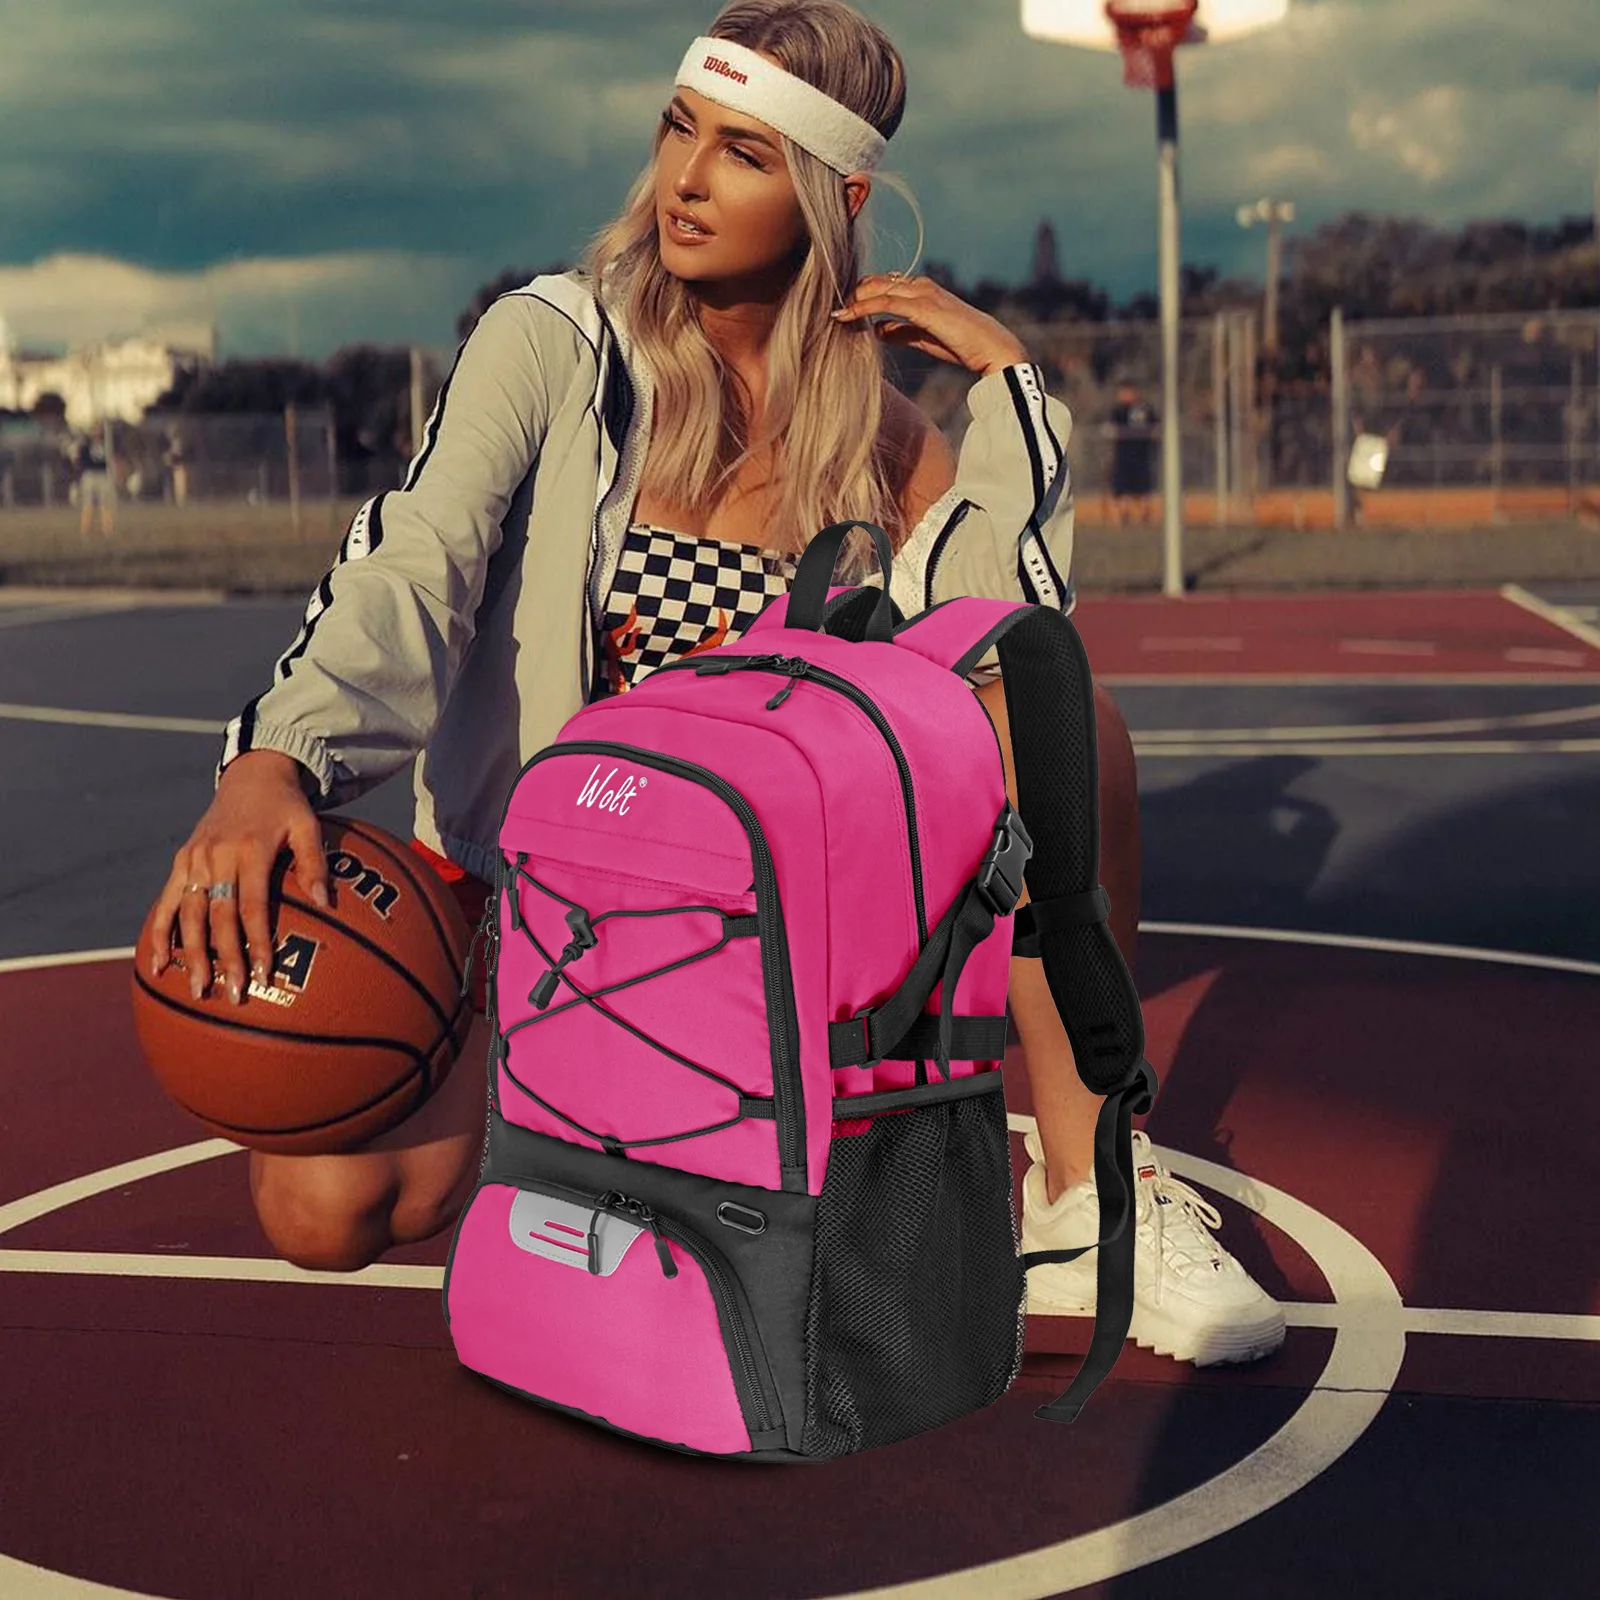 basketball-backpack-large-sport-bag-with-separate-ball-holder-shoes-compartment-basketball-soccer-volleyball-gym-training-bag